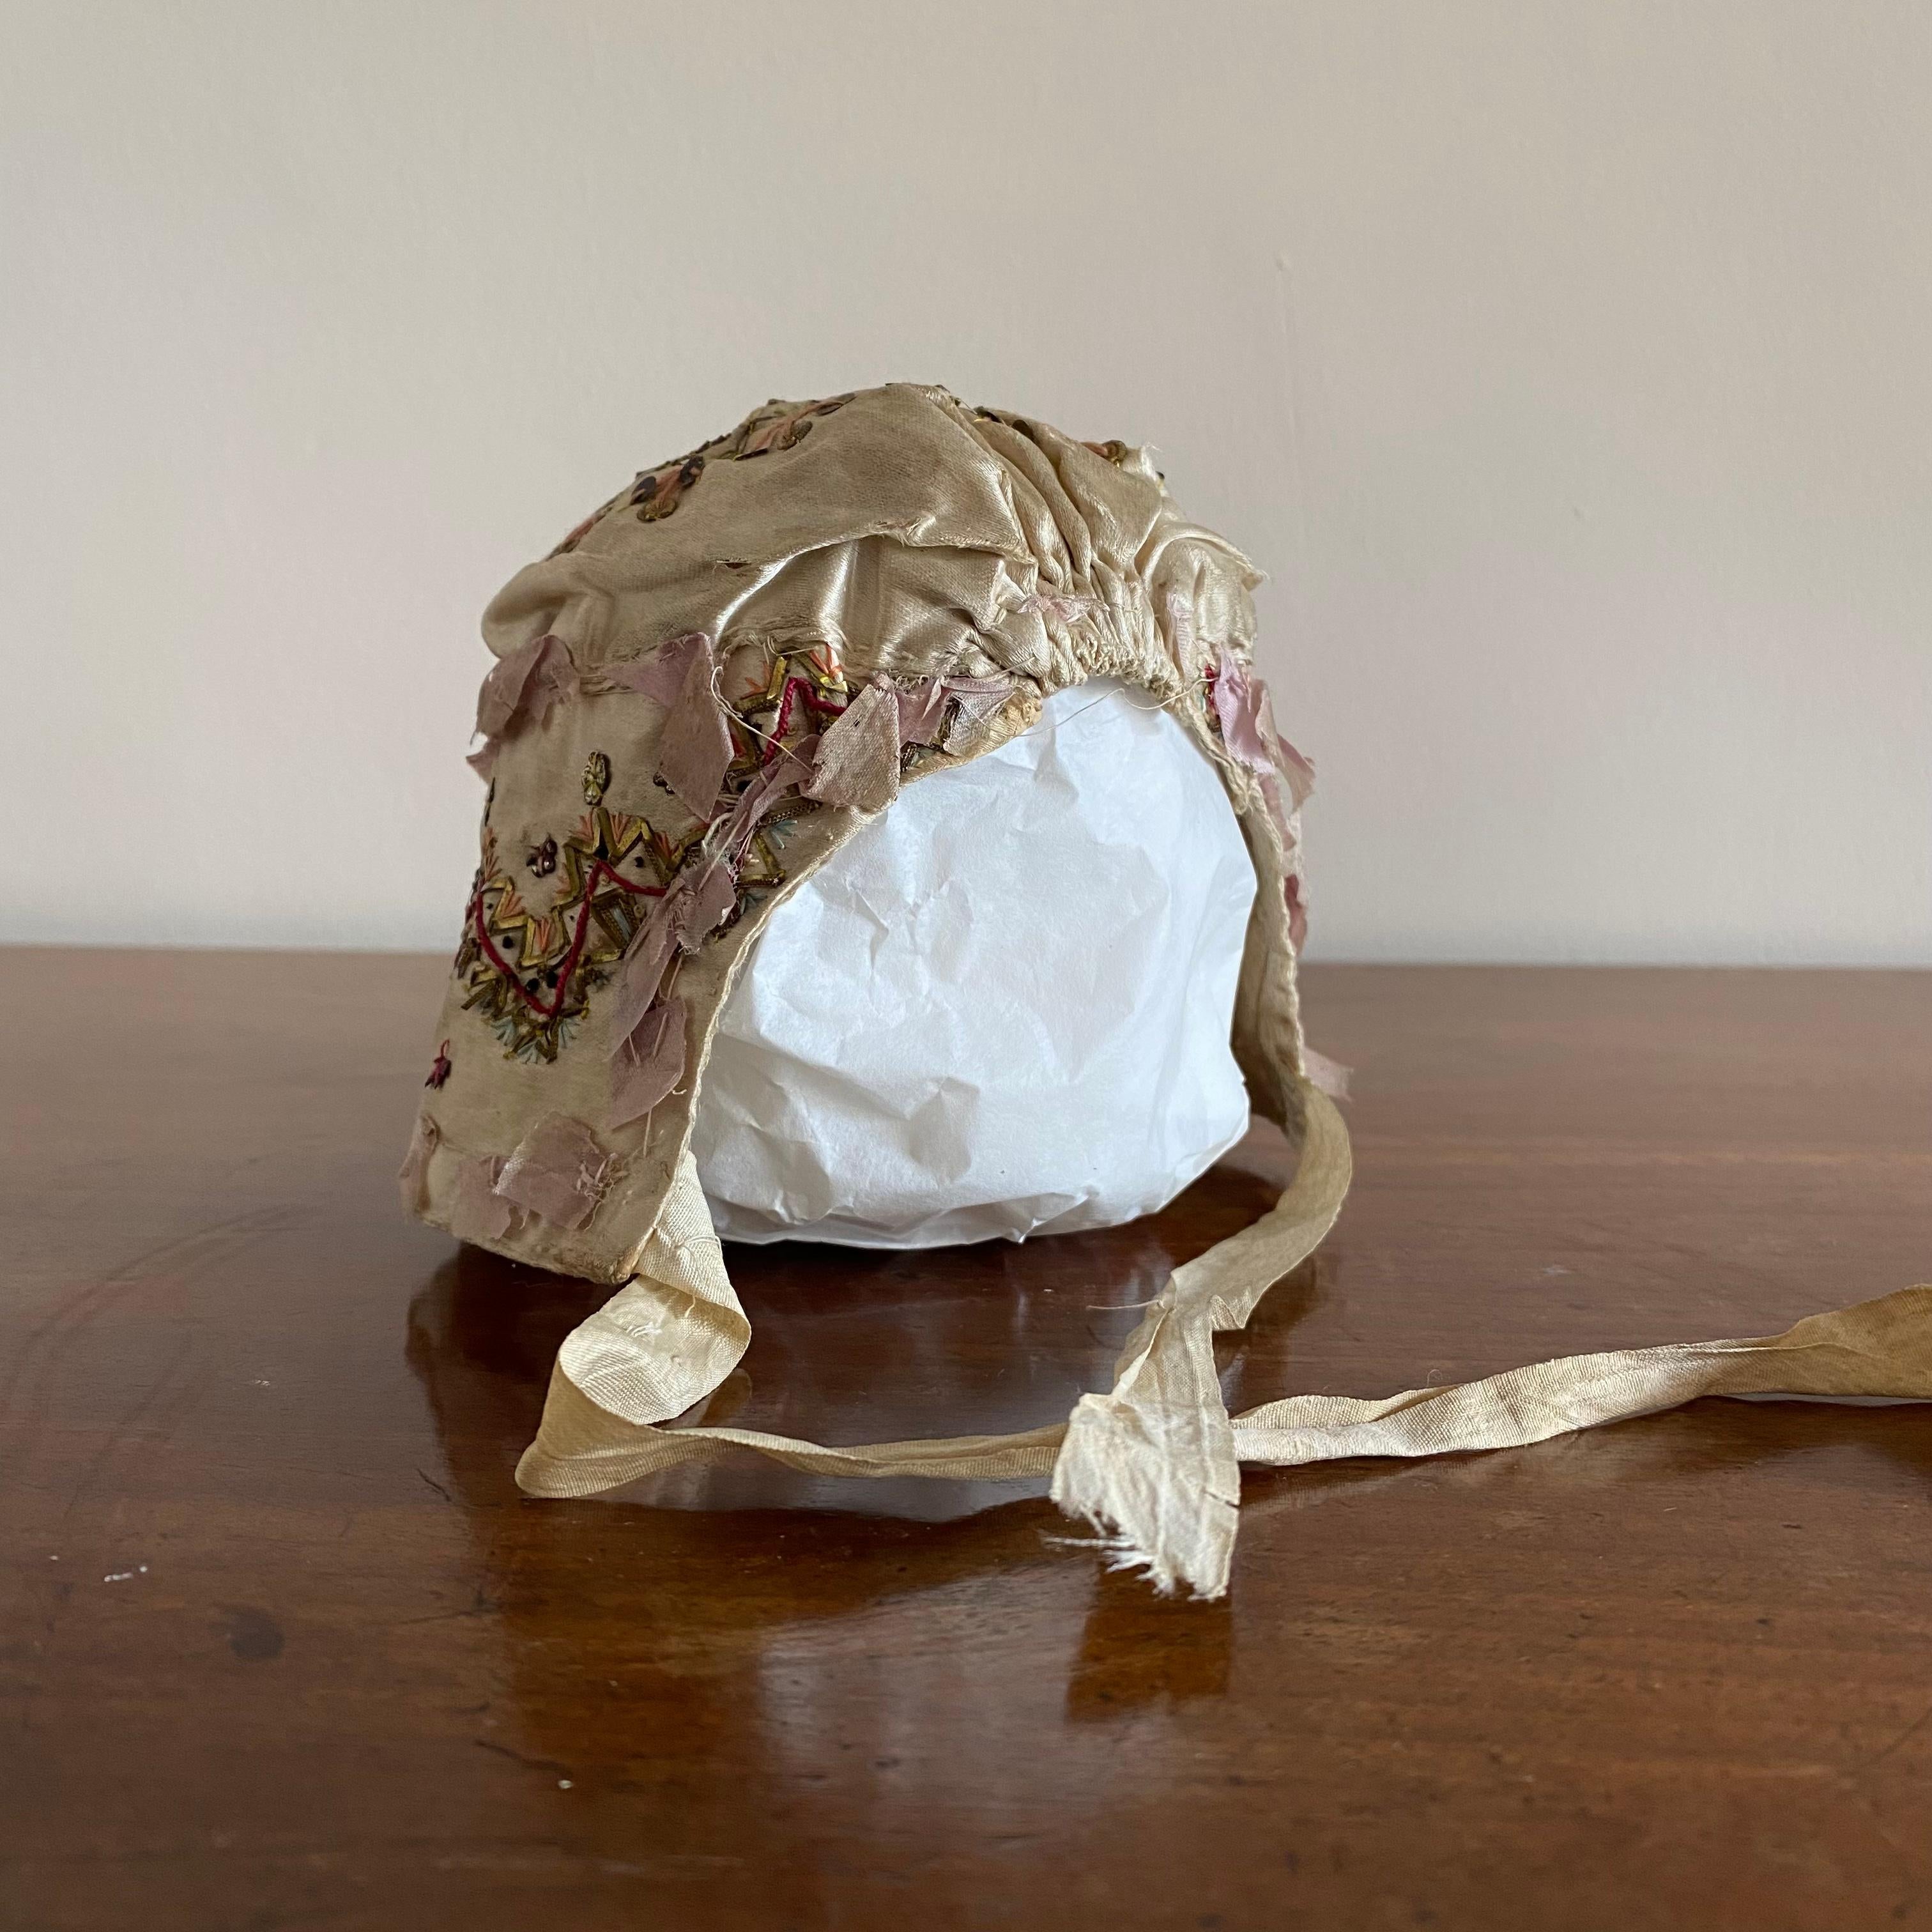 Early 19th Century English Silk Baby Bonnet.

A wonderful 19th century silk baby bonnet with sequins and wirework detail. Retaining its original tying ribbons. Circa 1800.

Measures: Height: 10cm

Width: 9cm

Depth: 9cm.